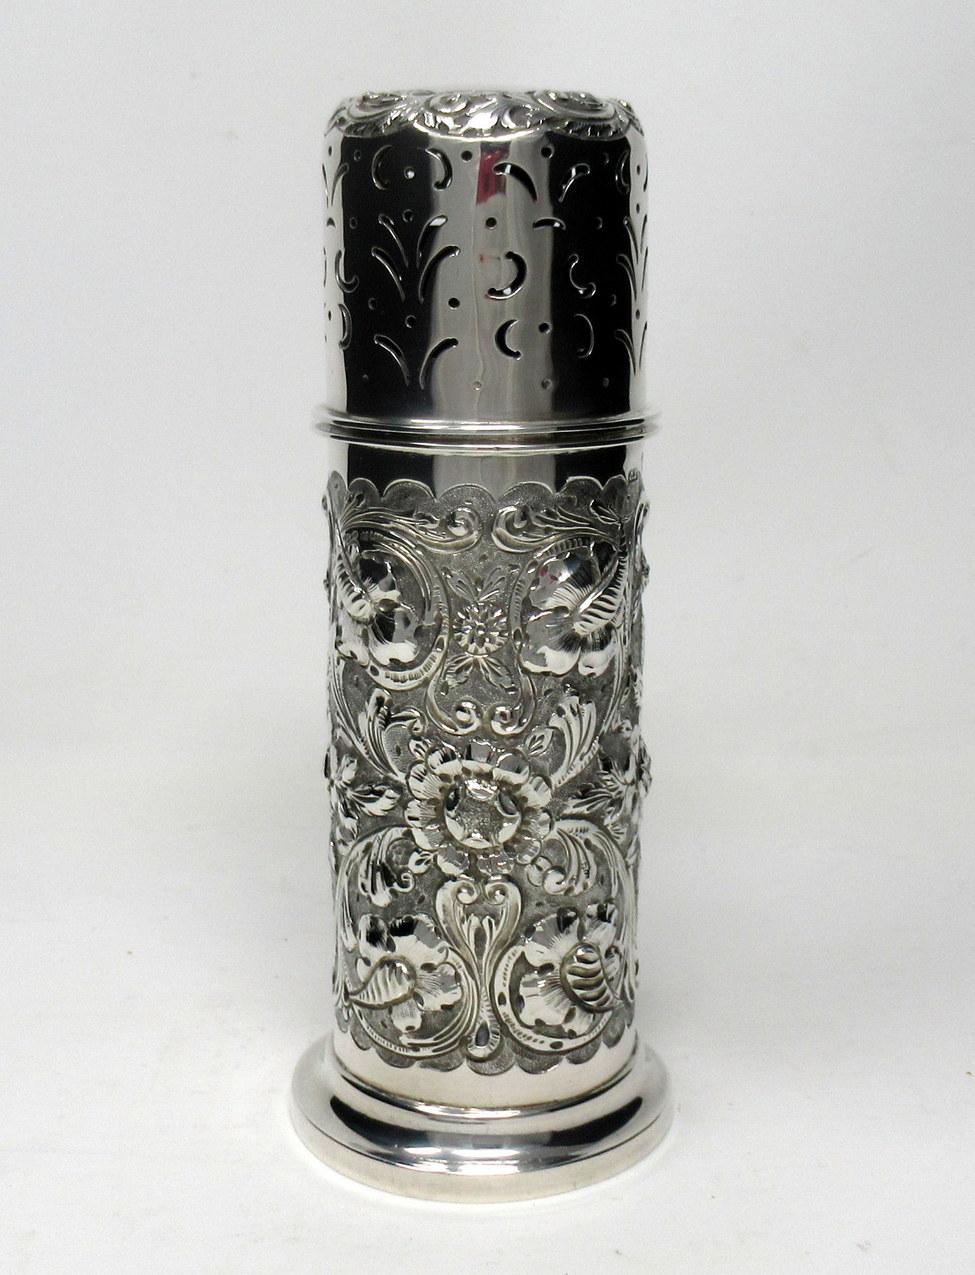 Stunning Irish heavy gauge silver two part table sugar caster Muffineer of cylindrical or lighthouse form and of outstanding quality ending on a circular spreading base.

The entire embossed with flowers leaves and scrolls, with elements of Art